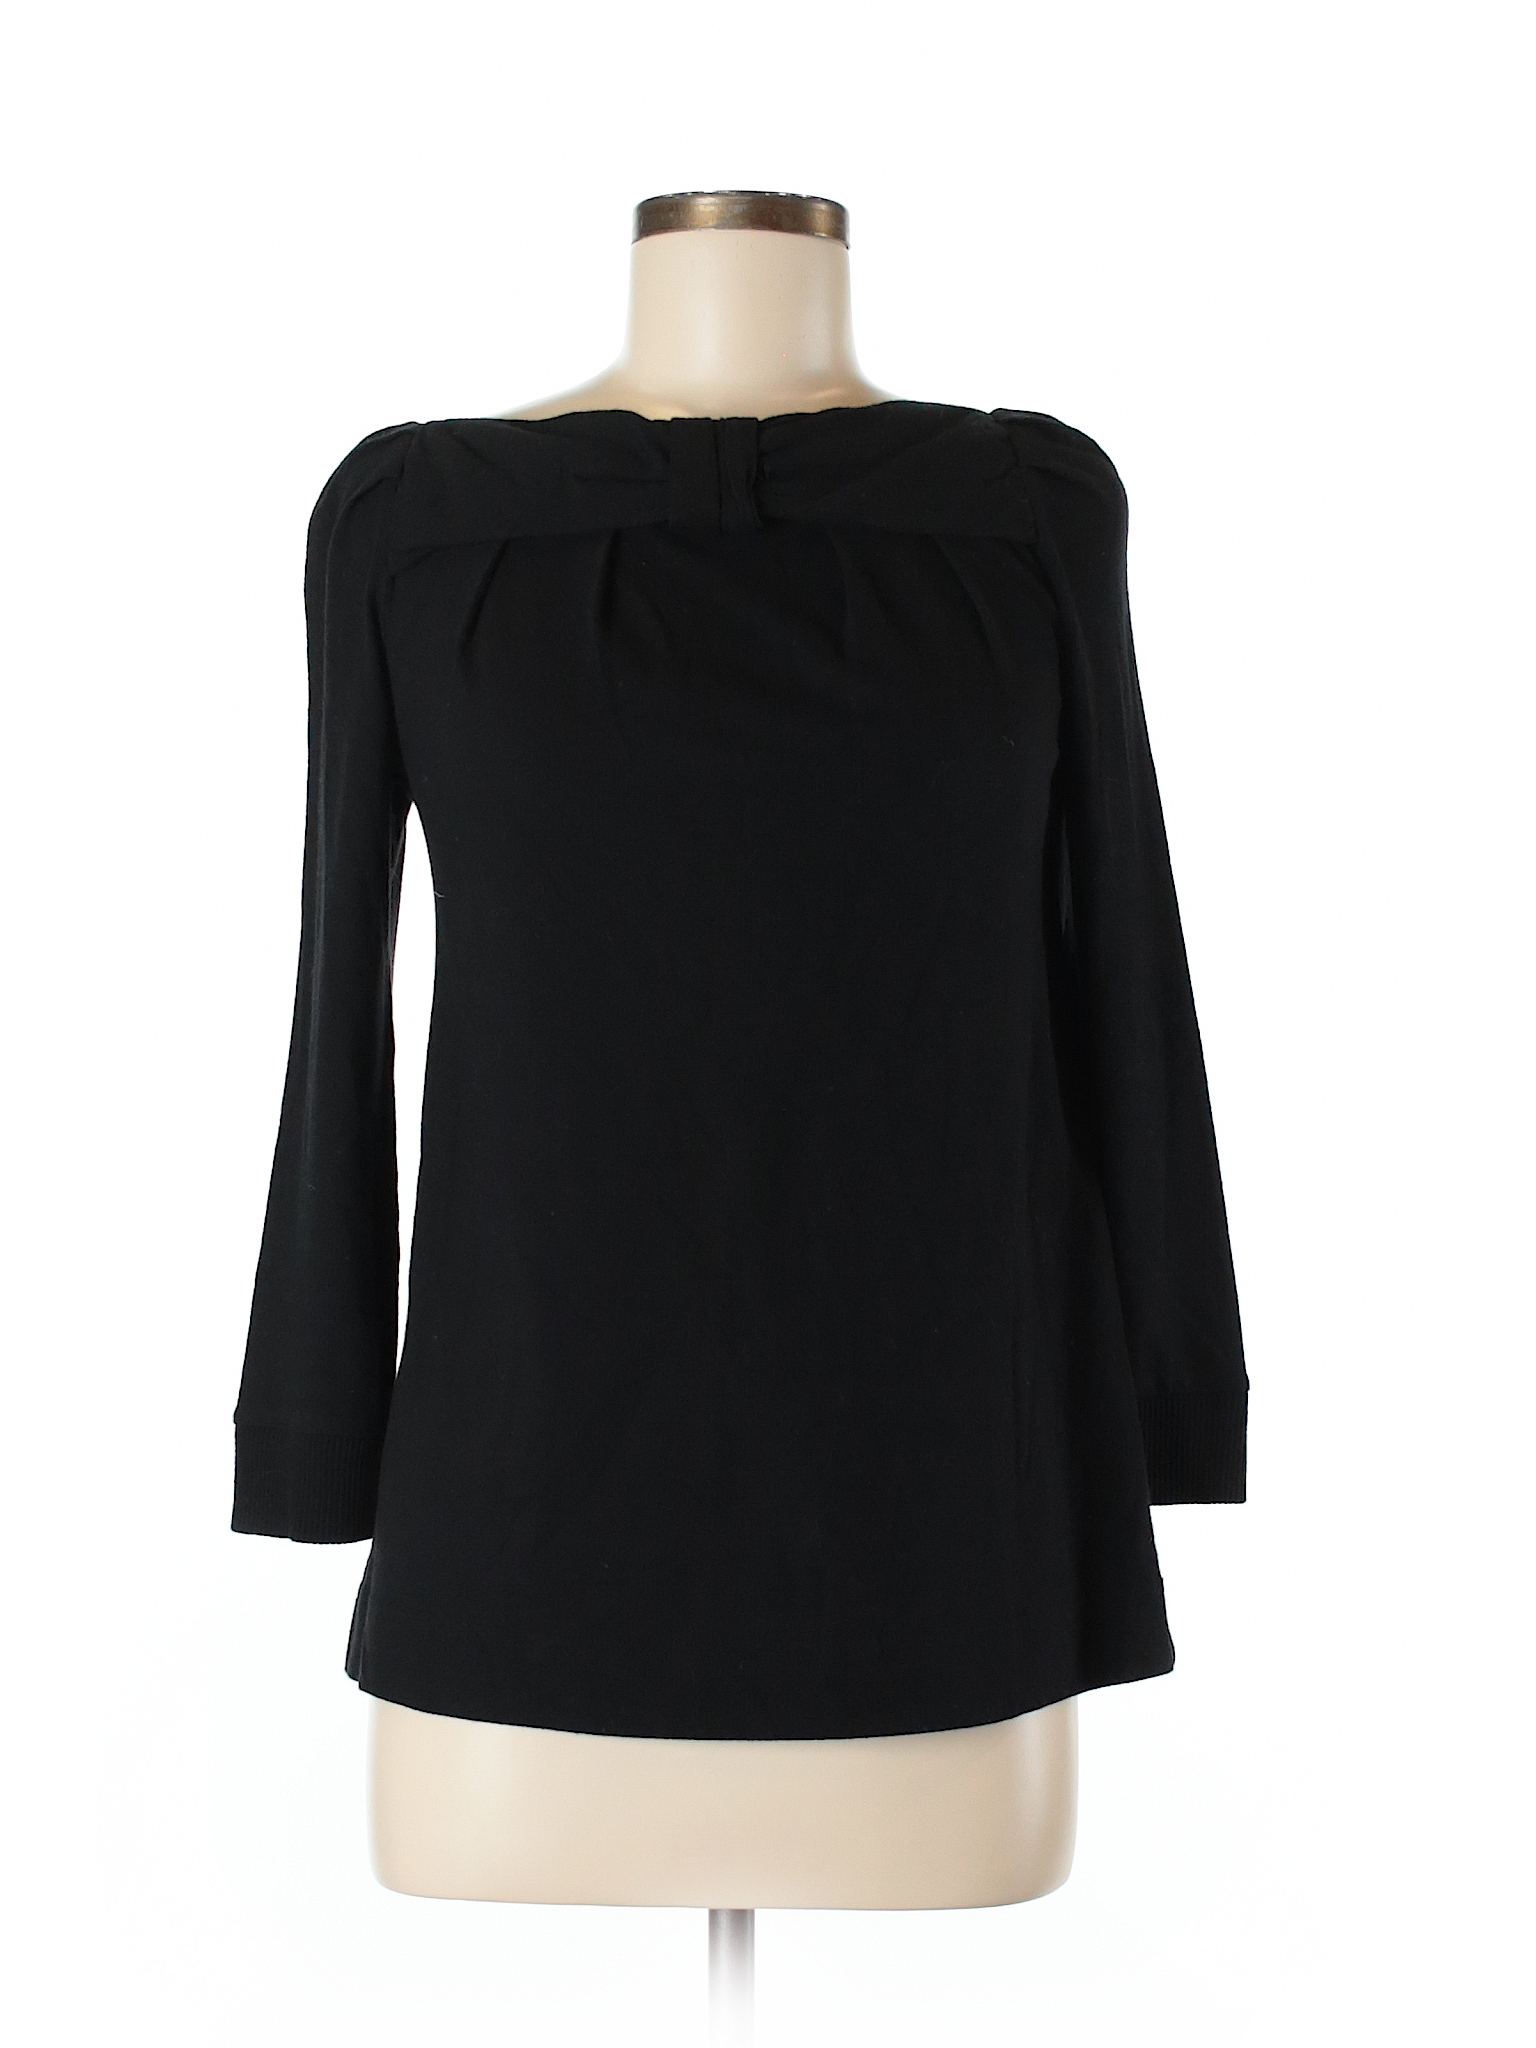 Marc by Marc Jacobs Solid Black 3/4 Sleeve Top Size M - 77% off | thredUP